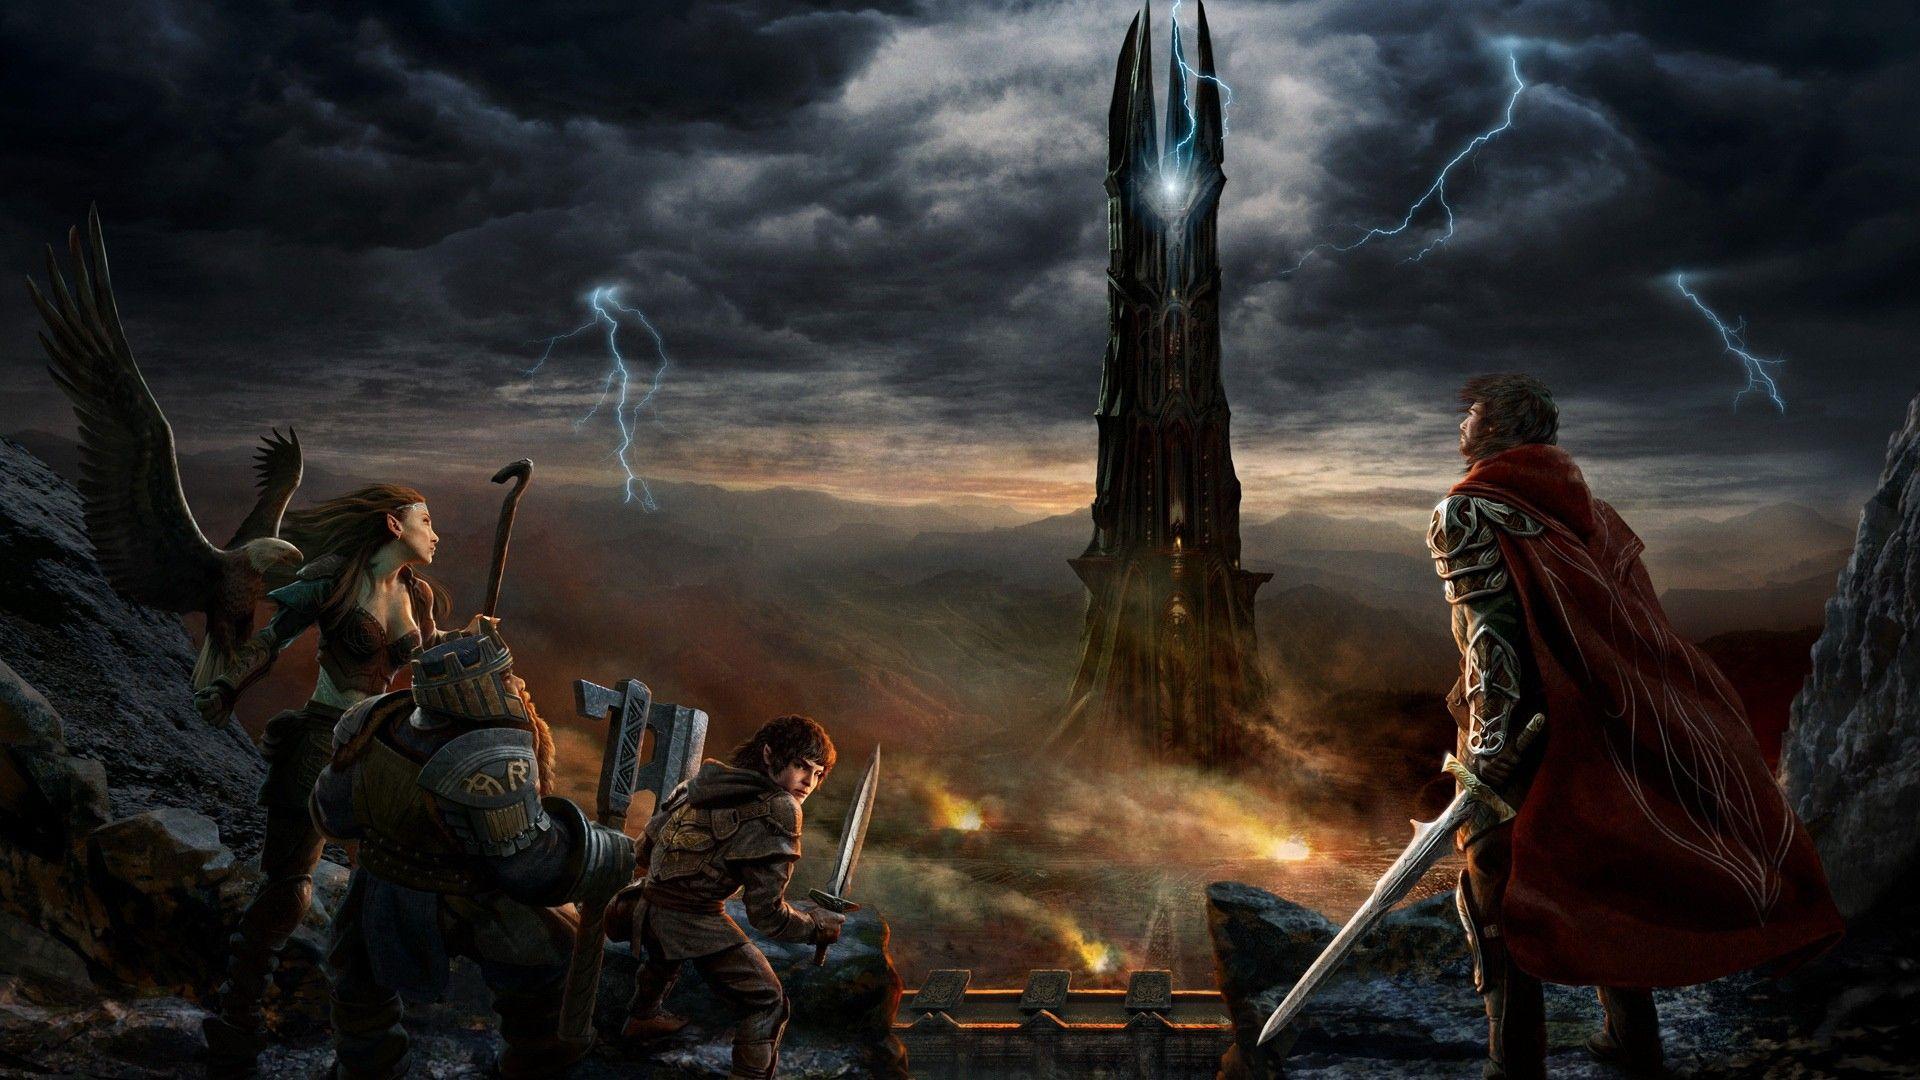 tower, Sauron, human, The Lord of the Rings, fantasy art, elves